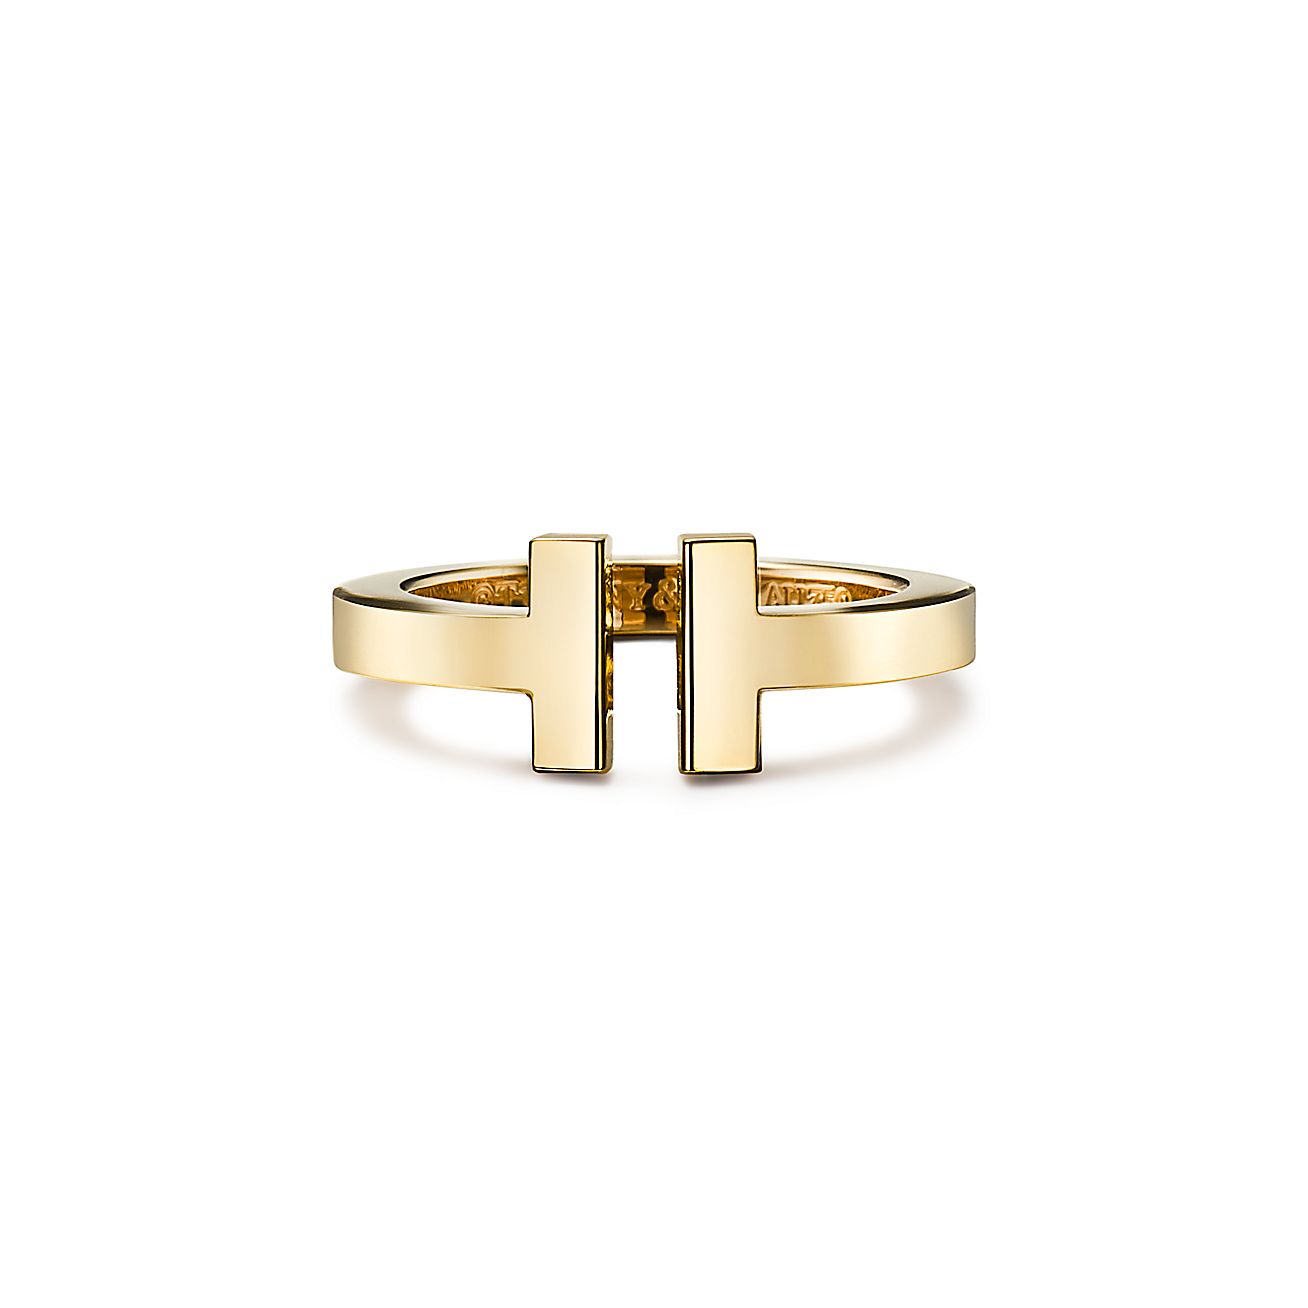 Tiffany TSquare Ring
in Yellow Gold